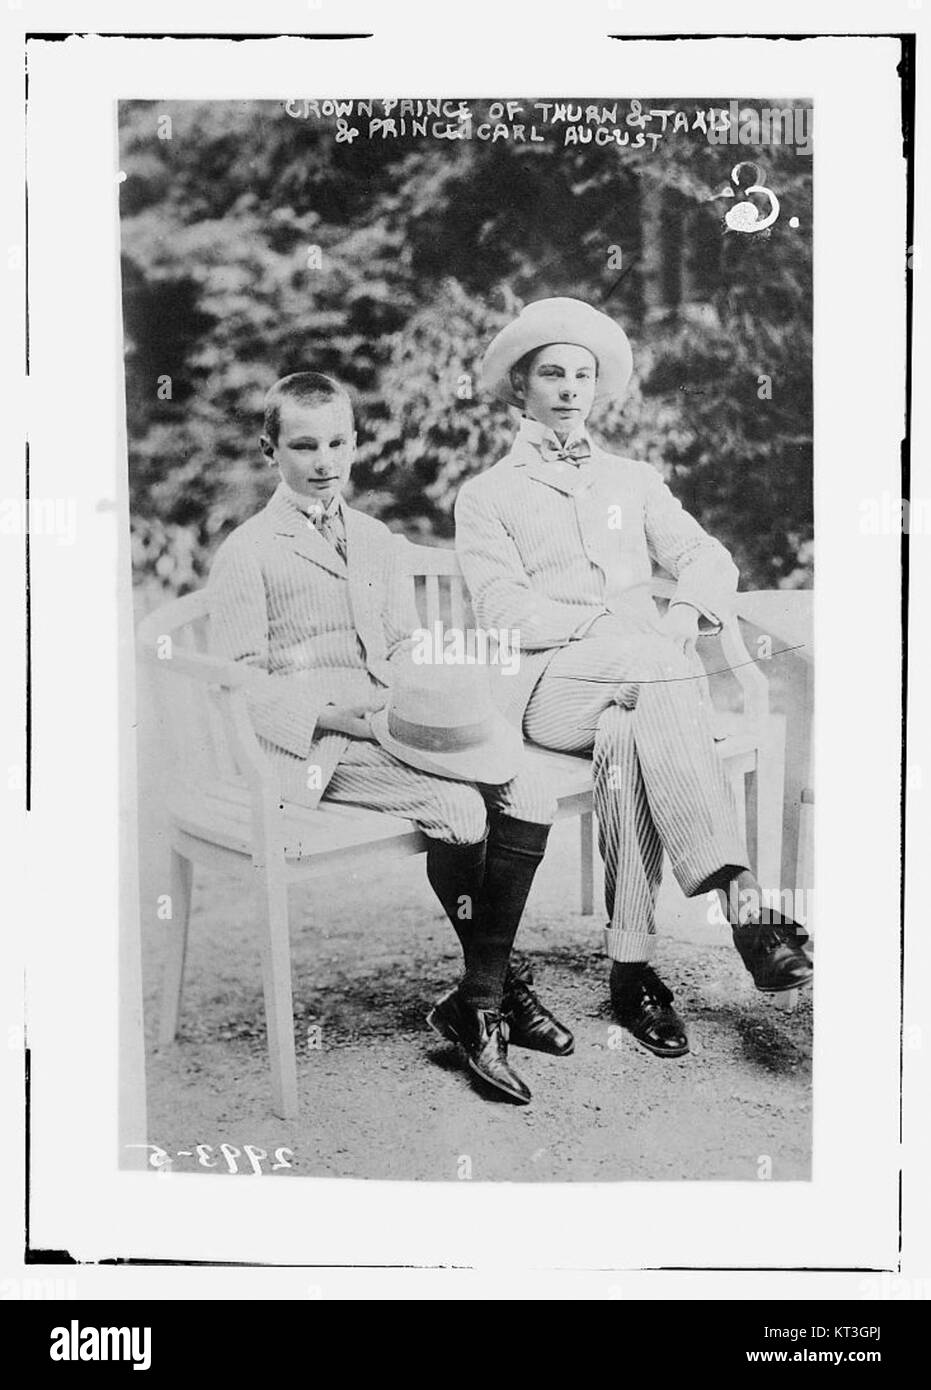 Franz Joseph, 9th Prince of Thurn and Taxis with Karl August, 10th Prince of Thurn and Taxis, ca 1910 Stock Photo